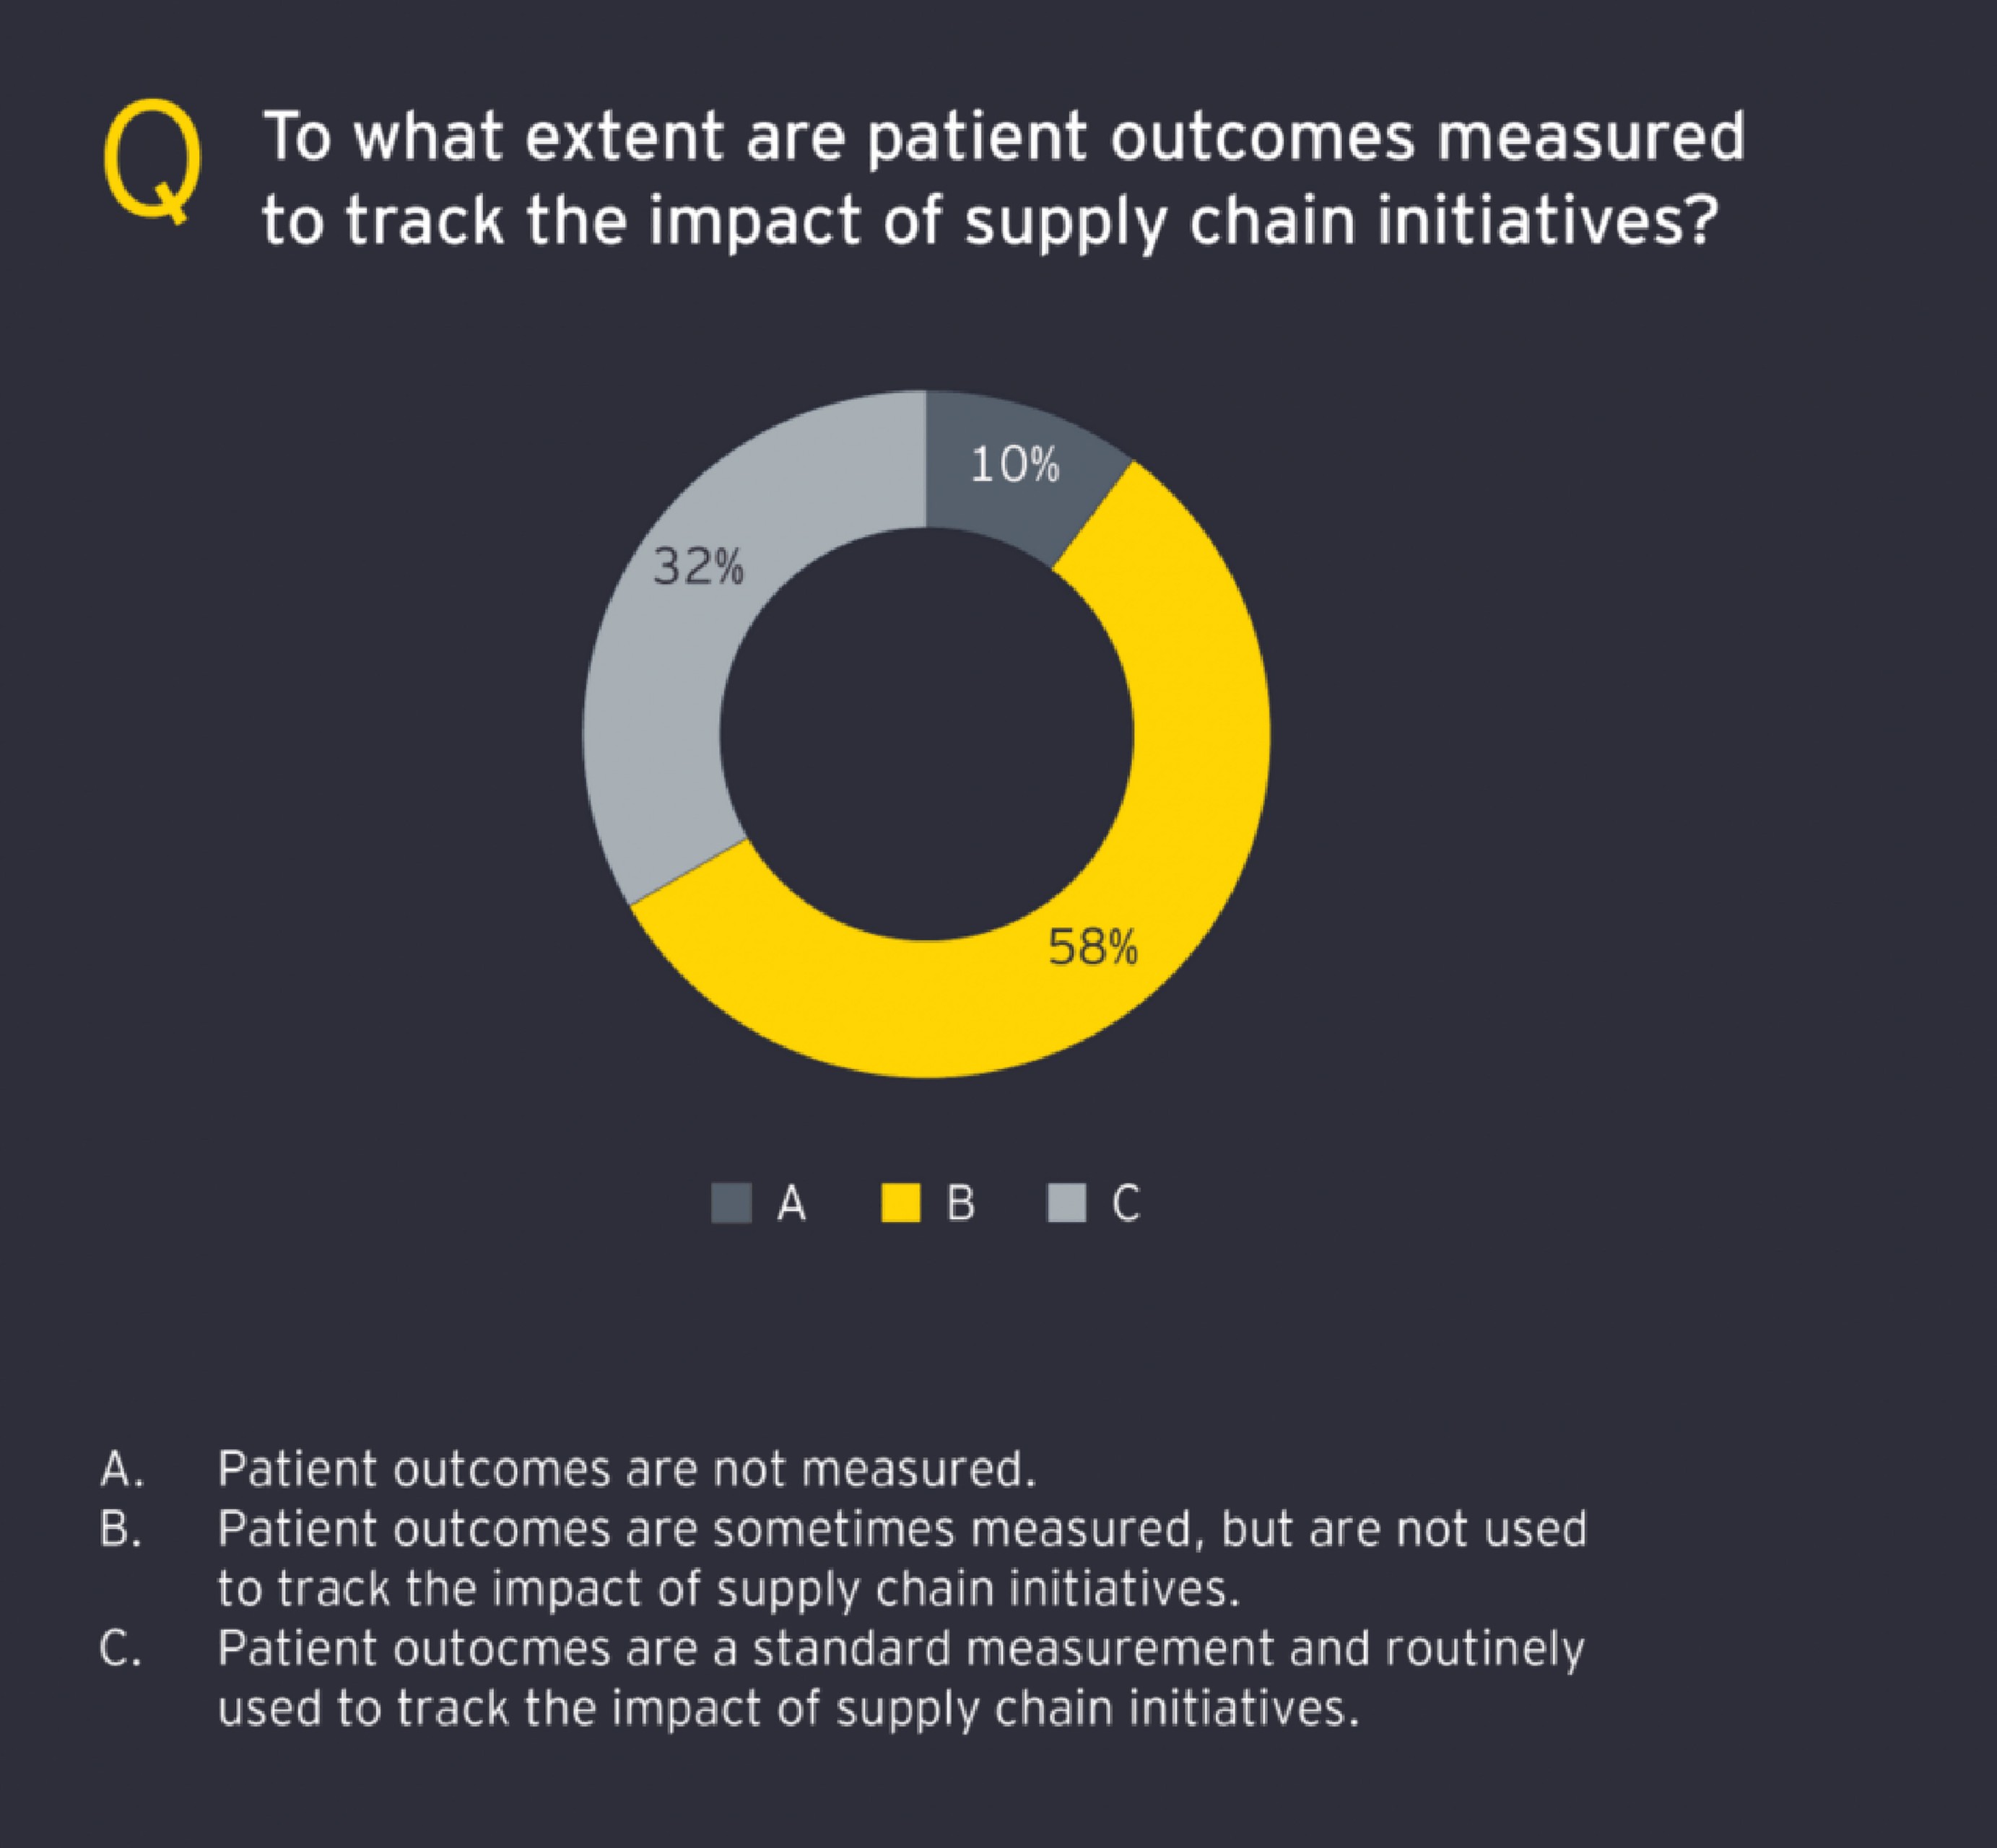 Graph showing the extent to which patient outcomes are measured to track the impact of supply chain initiatives